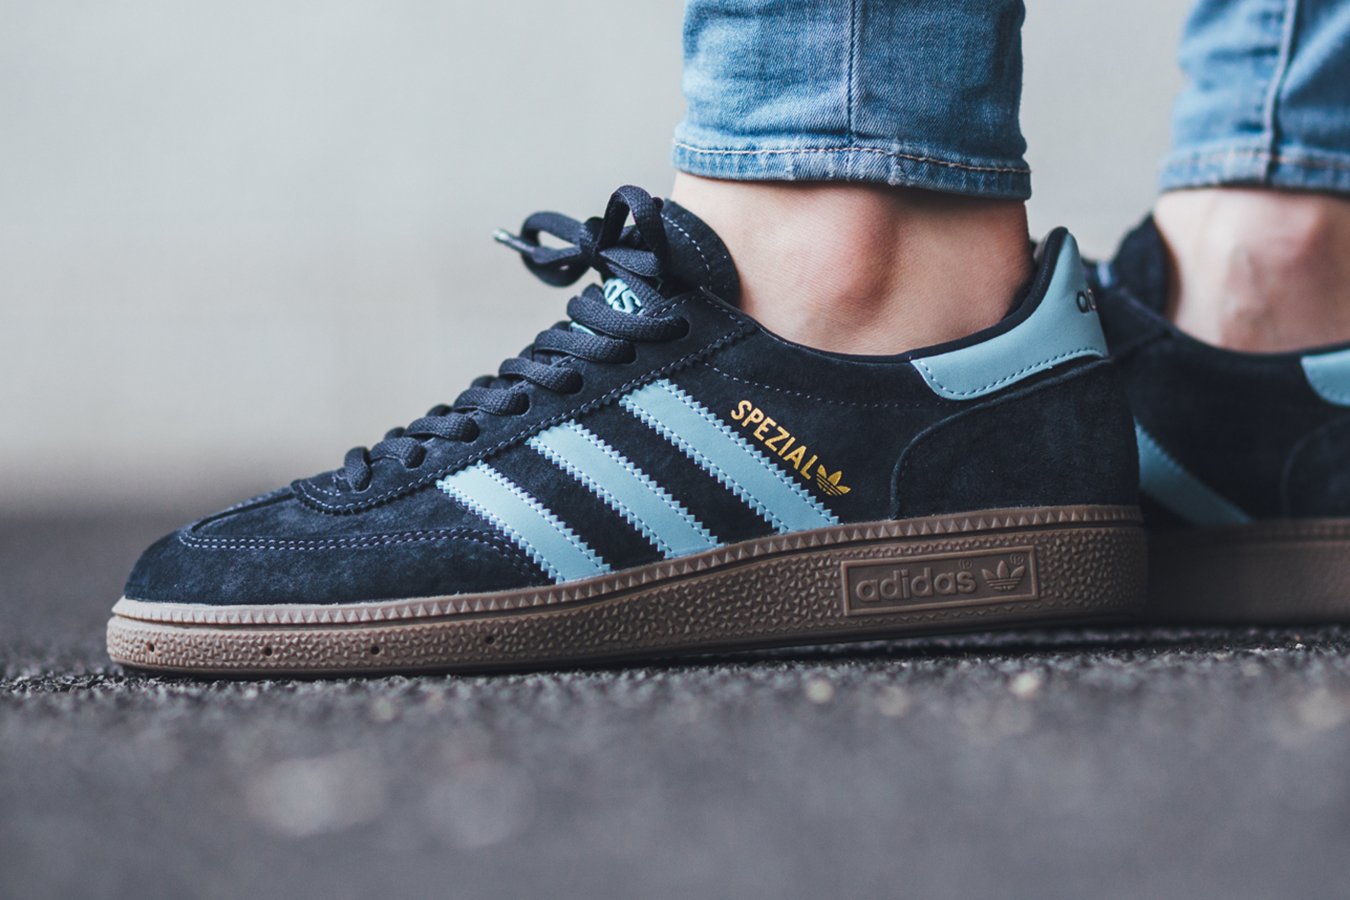 Titolo on Twitter: "Adidas Spezial - Night Navy/Clear Blue/Gum SHOP HERE: https://t.co/0wG3PmZAEK https://t.co/gDxN0ngrhC" / Twitter